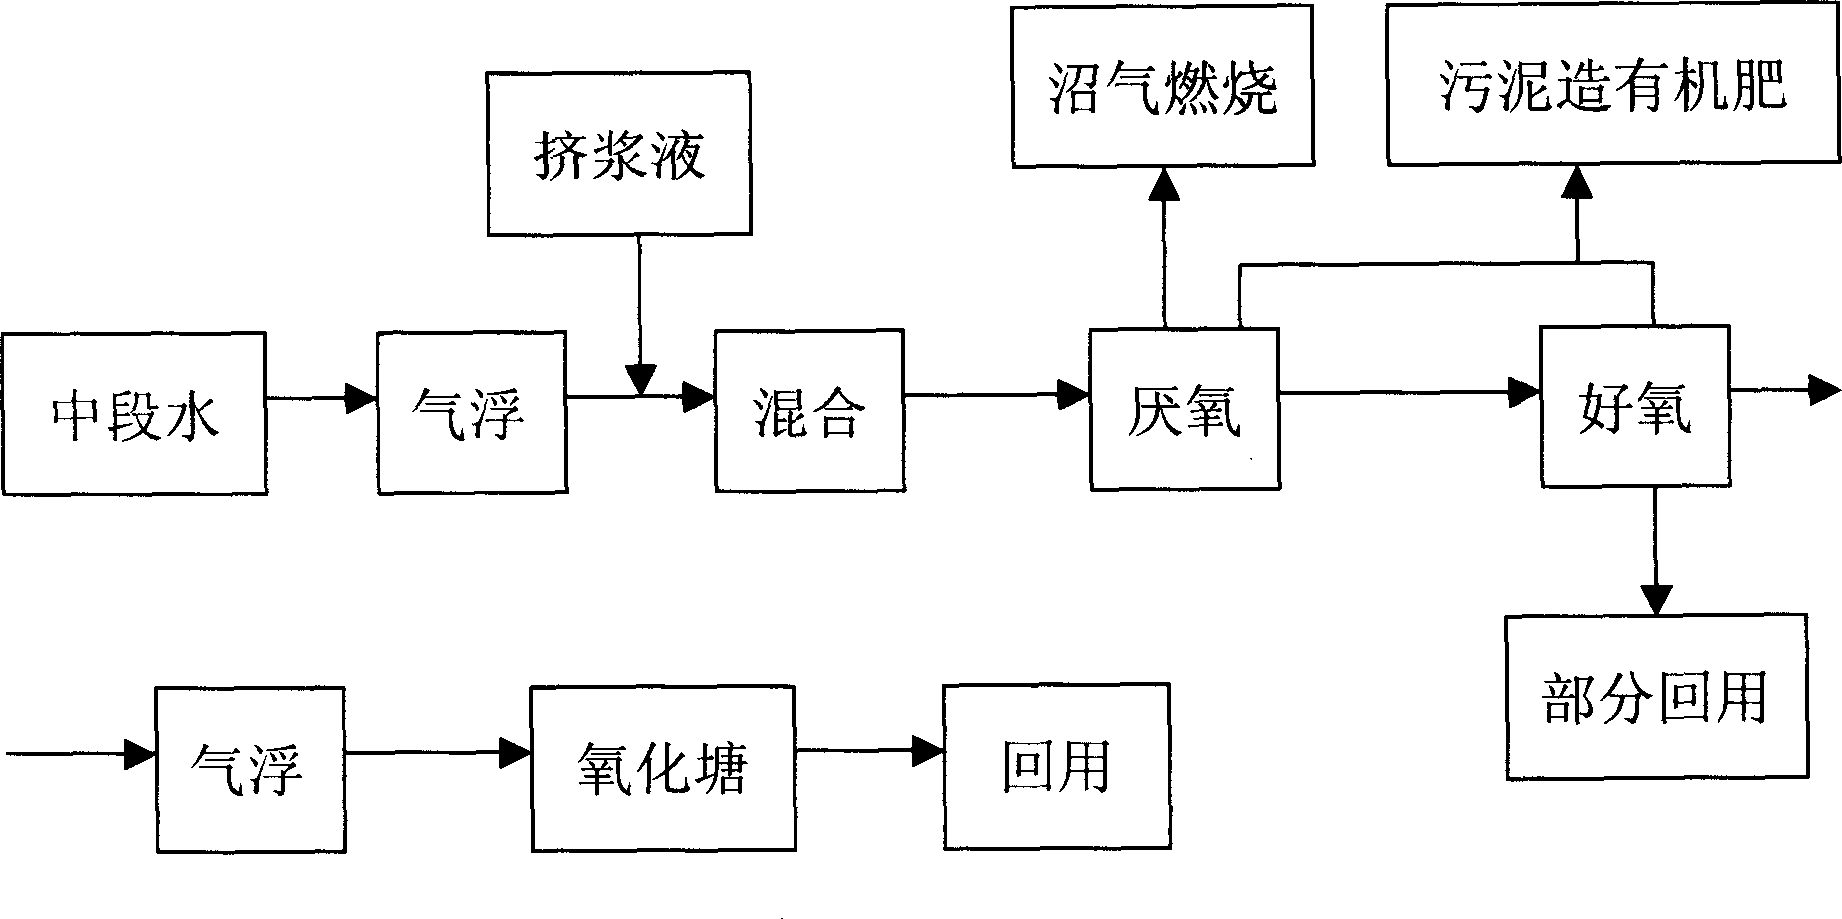 Process for treating papermaking waste liquid of vapor blasting straw pulping